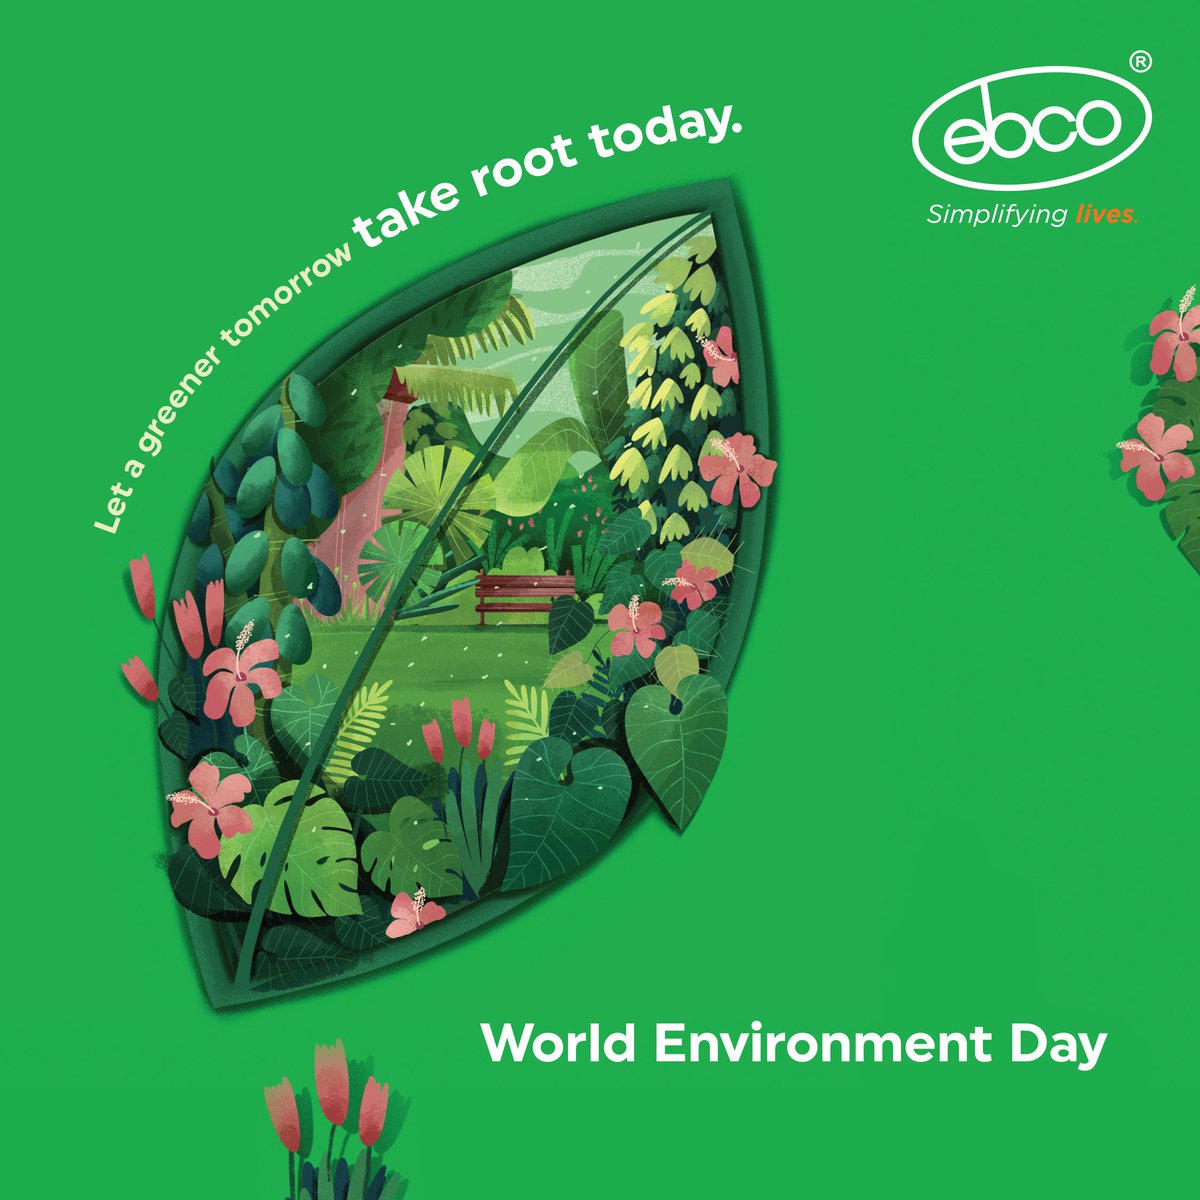 Throwback to our work for Ebco Furniture Fittings on World Environment Day for their commitment to build a sustainable tomorrow. #SustainabilityAtEbco

#Ebco #InfectiousAdvertising #Creative #Throwback